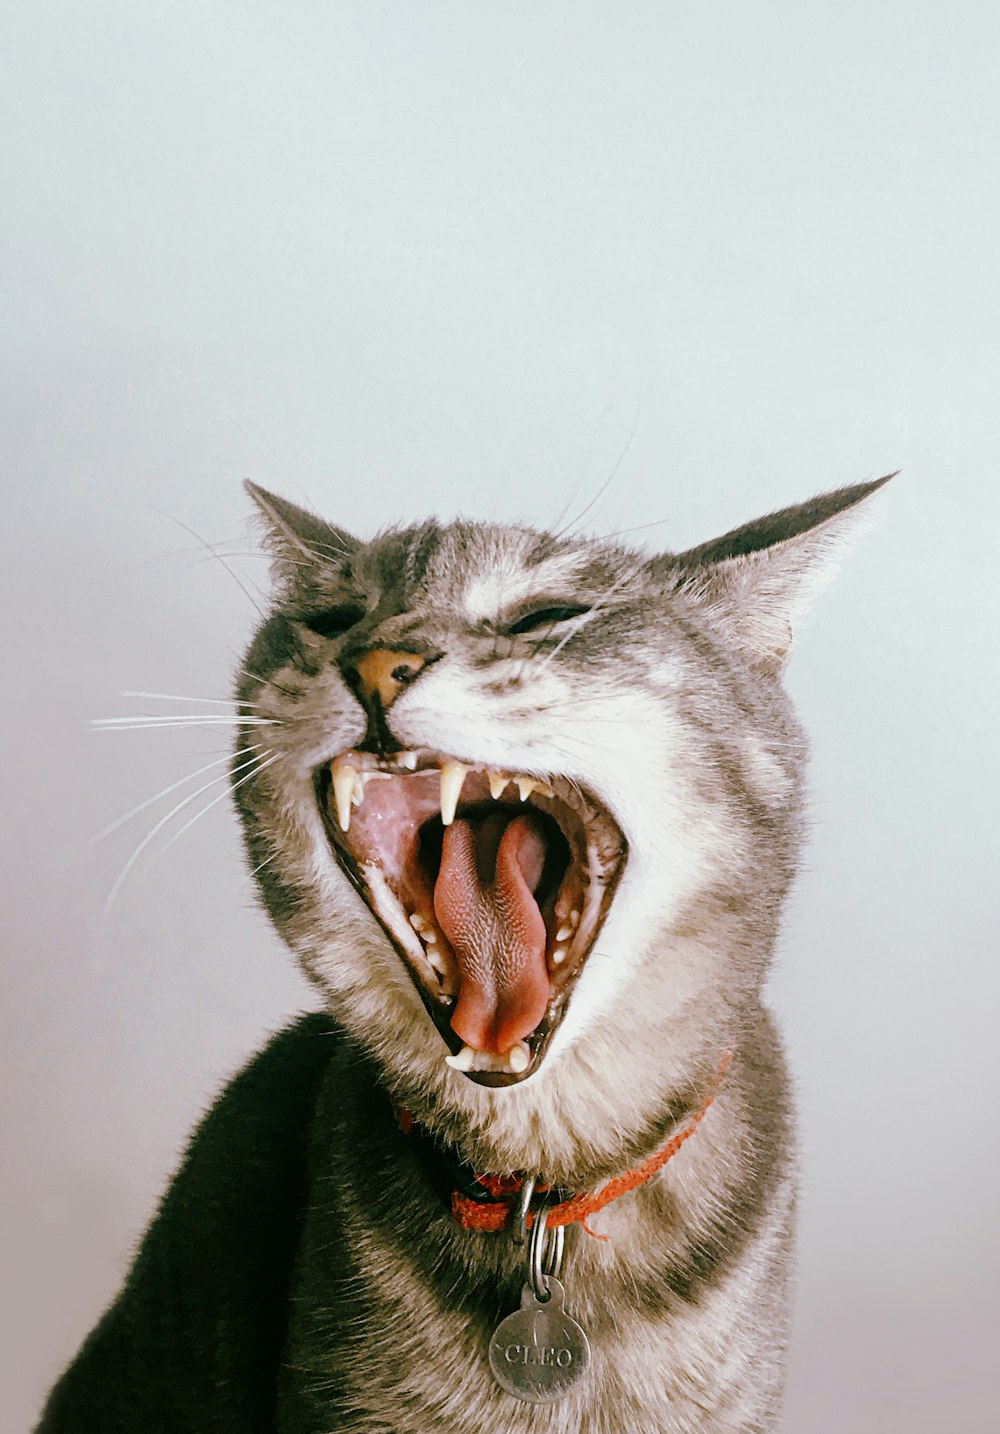 grey and white cat with mouth open